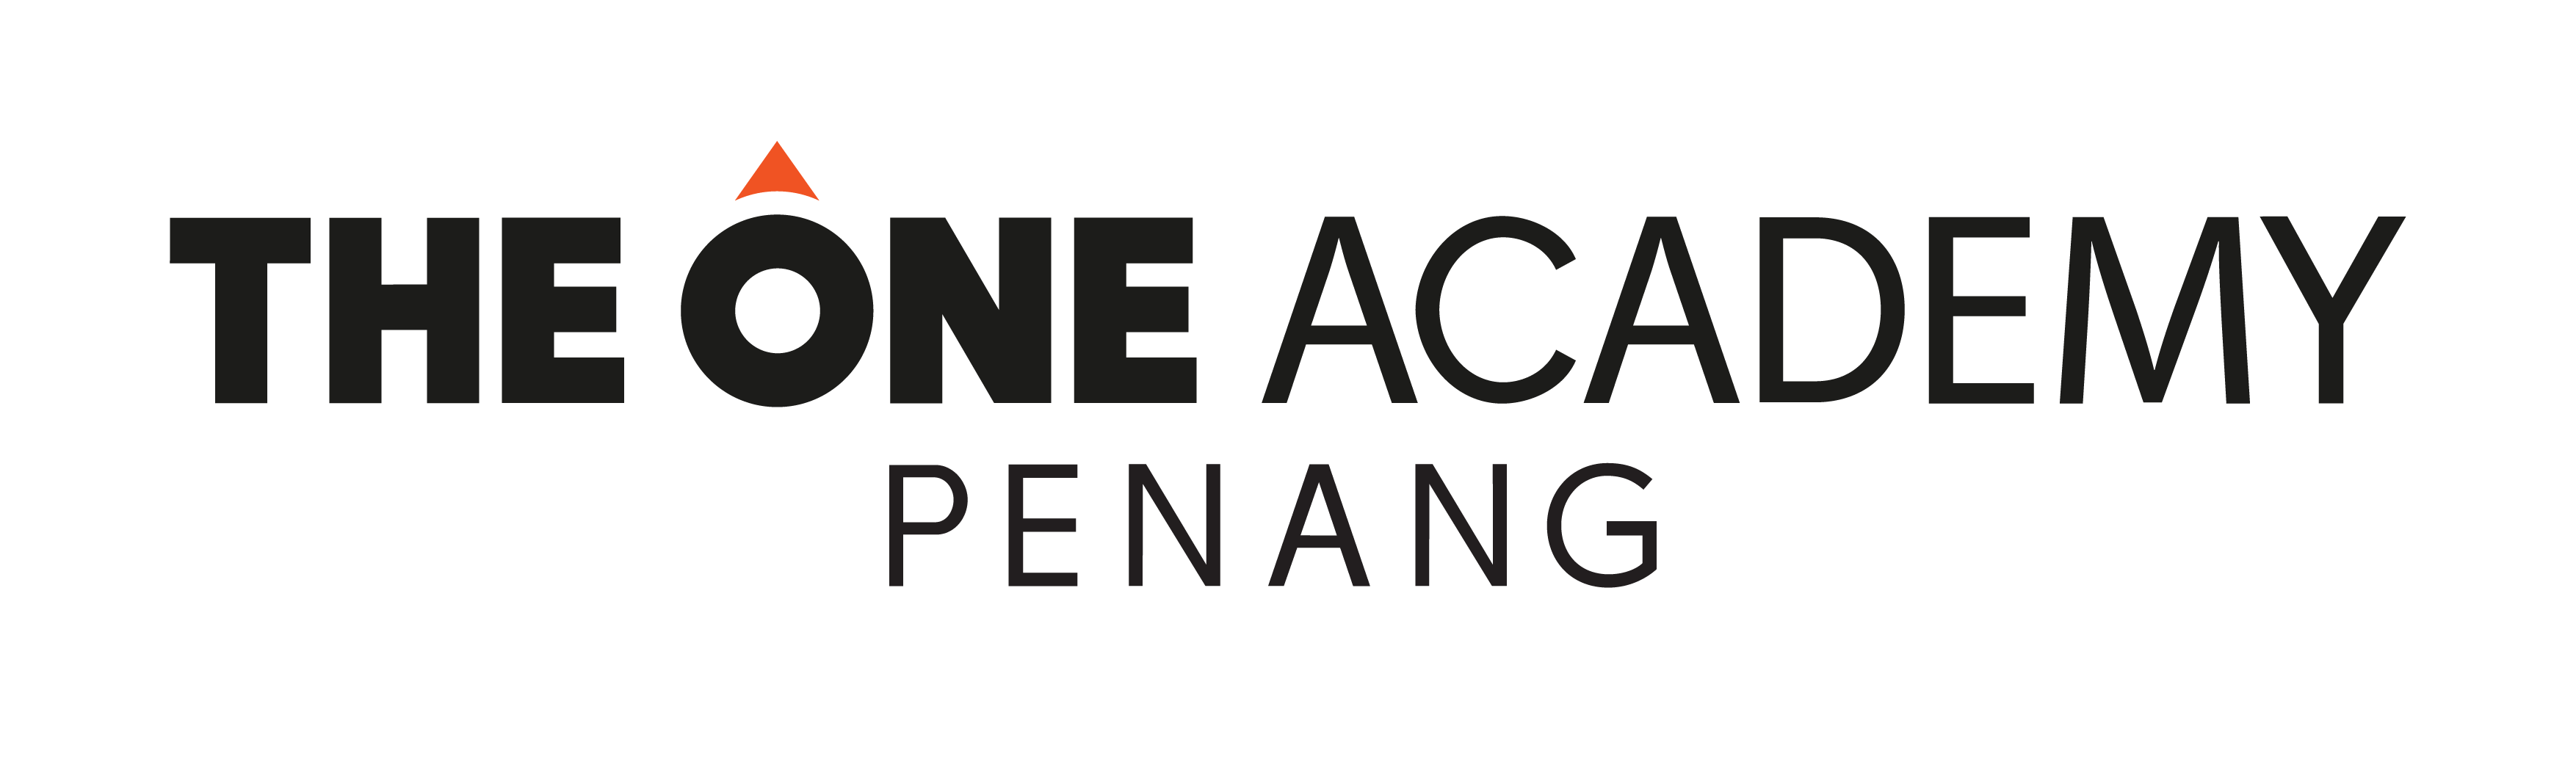 The One Academy Penang